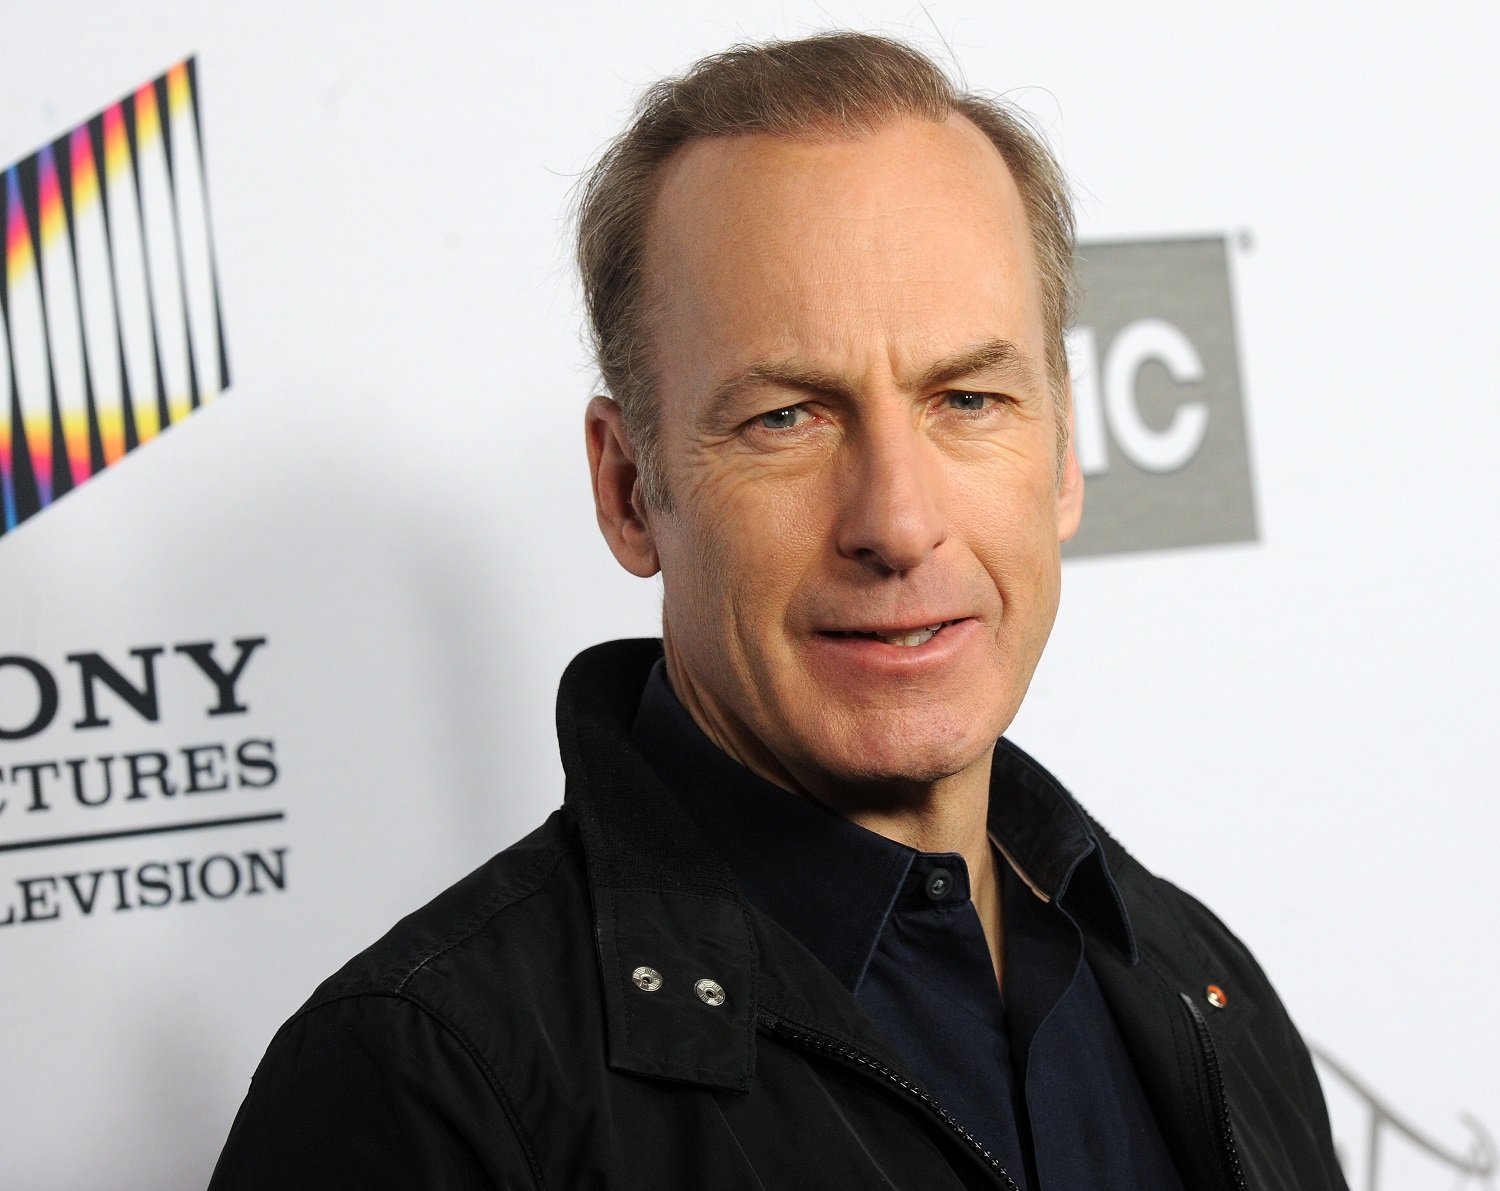 Bob Odenkirk and Lorne Michaels worked together at SNL